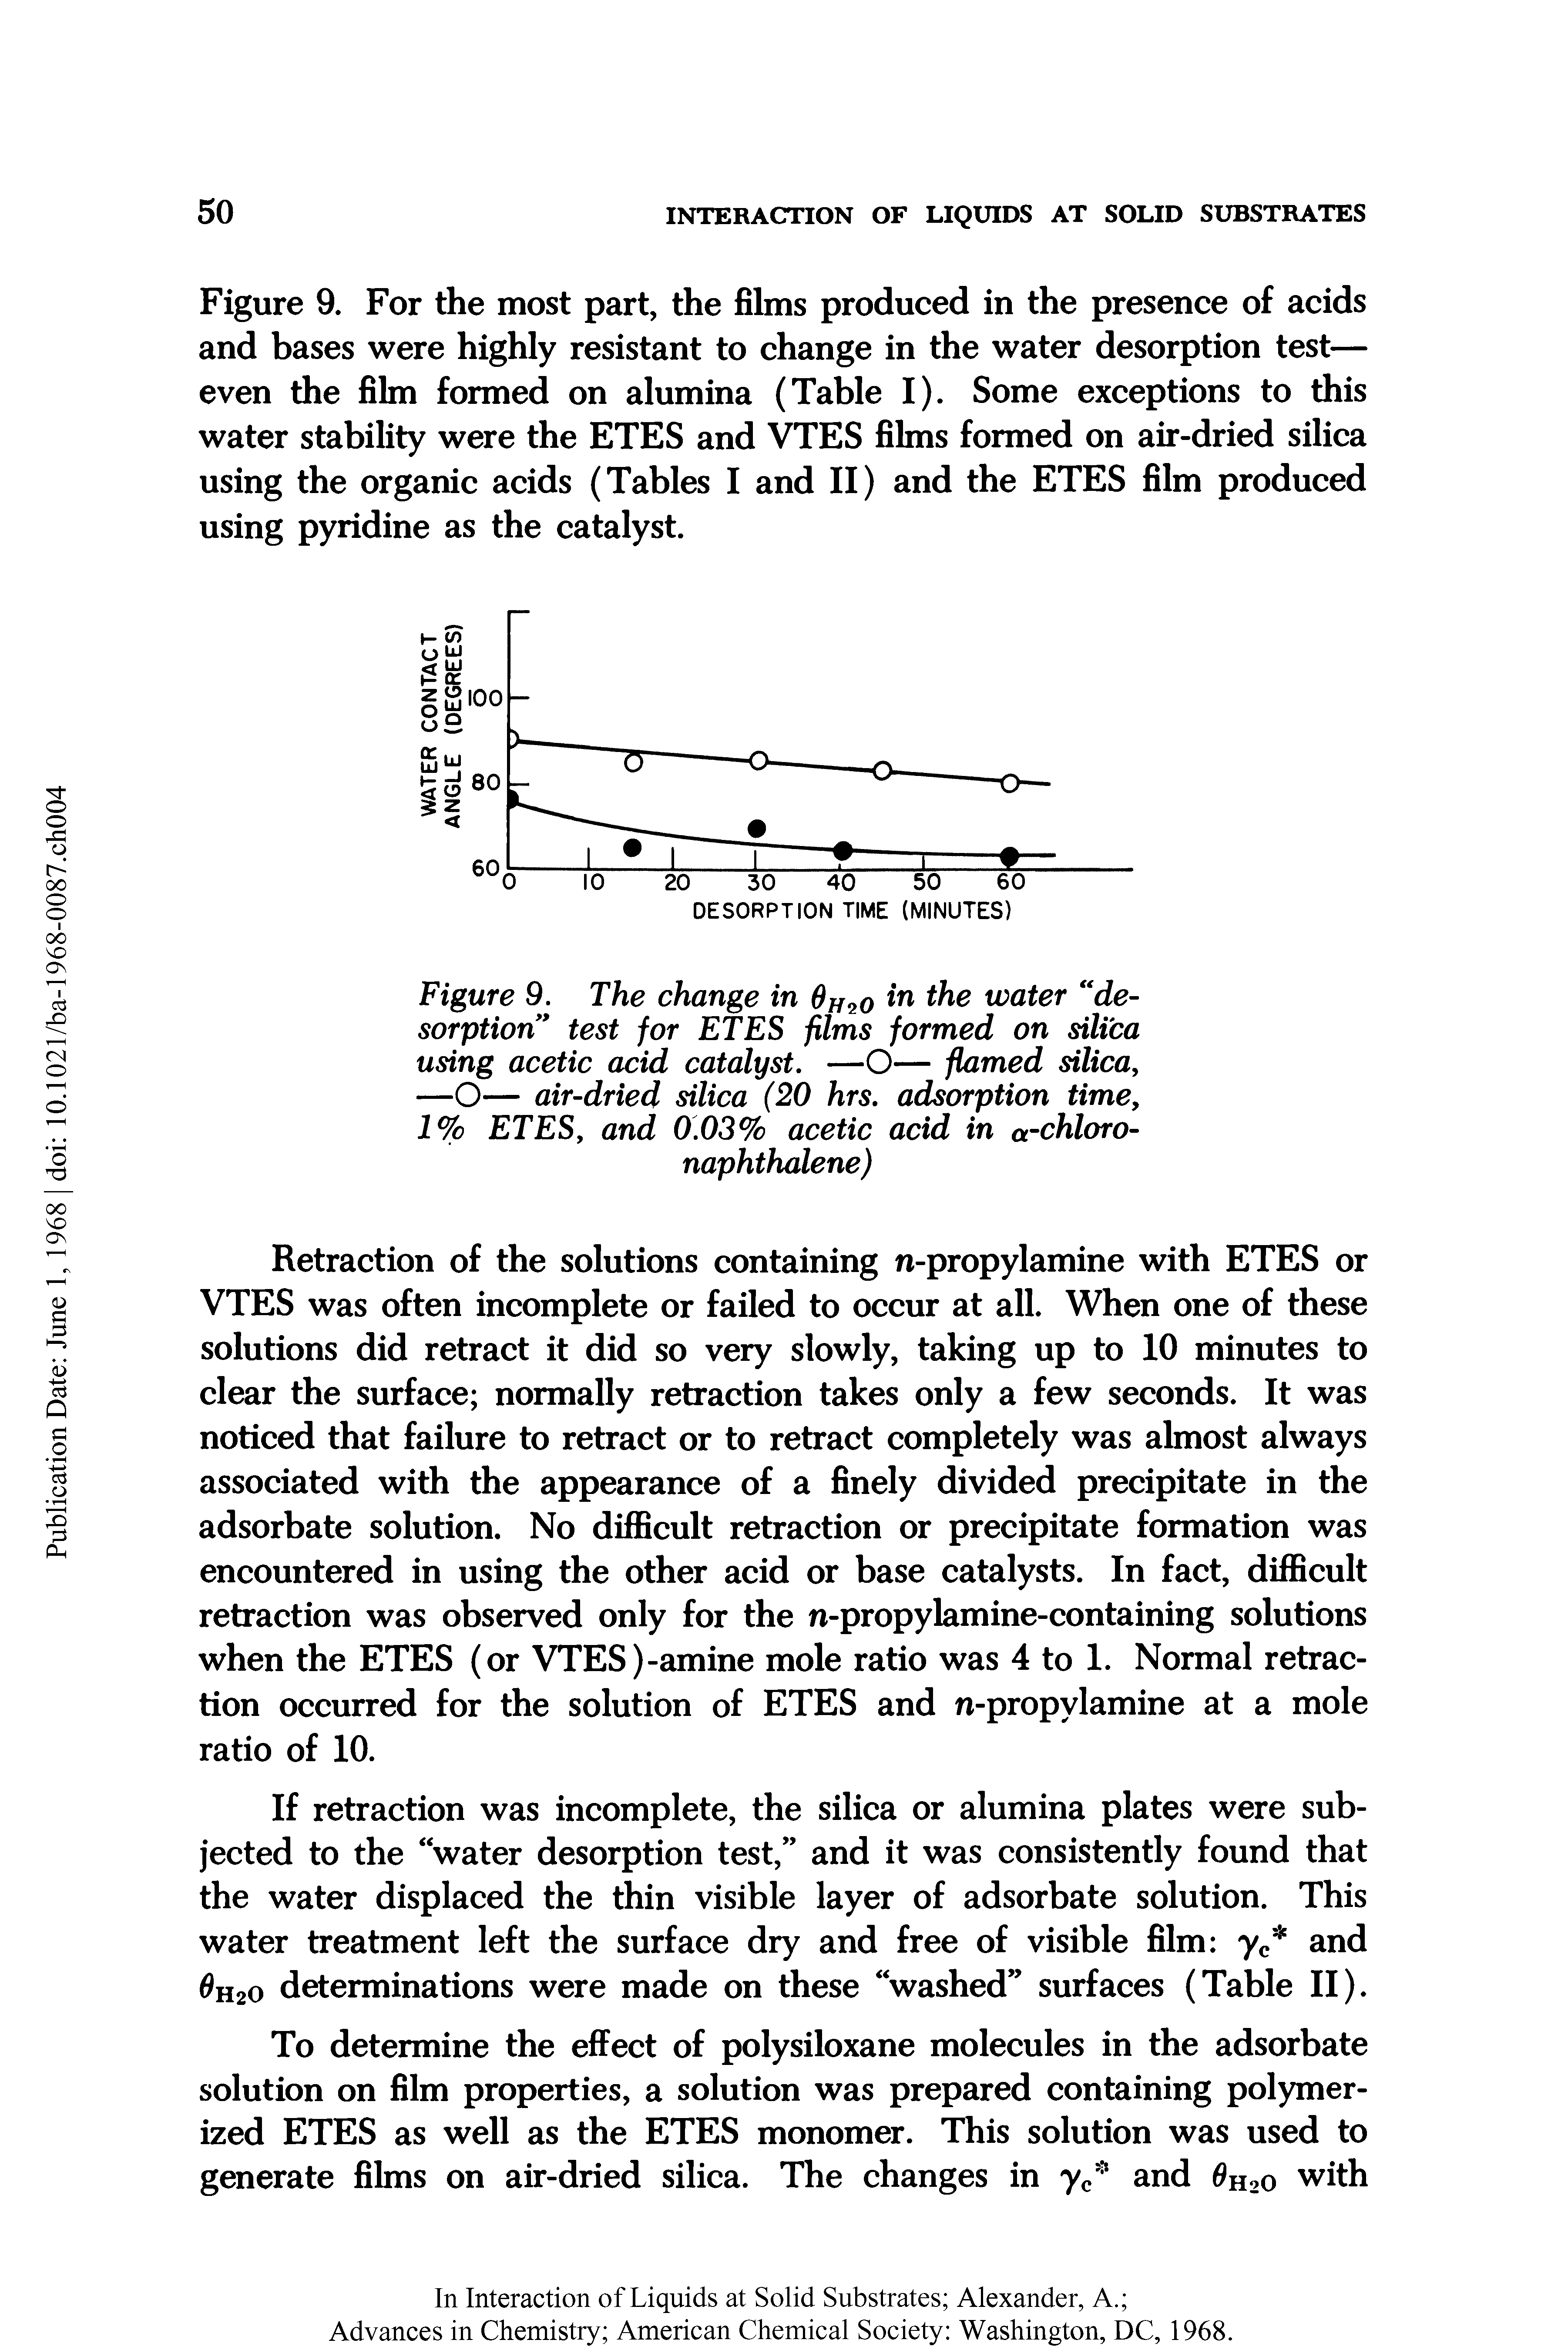 Figure 9. For the most part, the films produced in the presence of acids and bases were highly resistant to change in the water desorption test— even the film formed on alumina (Table I). Some exceptions to this water stability were the ETES and VTES films formed on air-dried silica using the organic acids (Tables I and II) and the ETES film produced using pyridine as the catalyst.